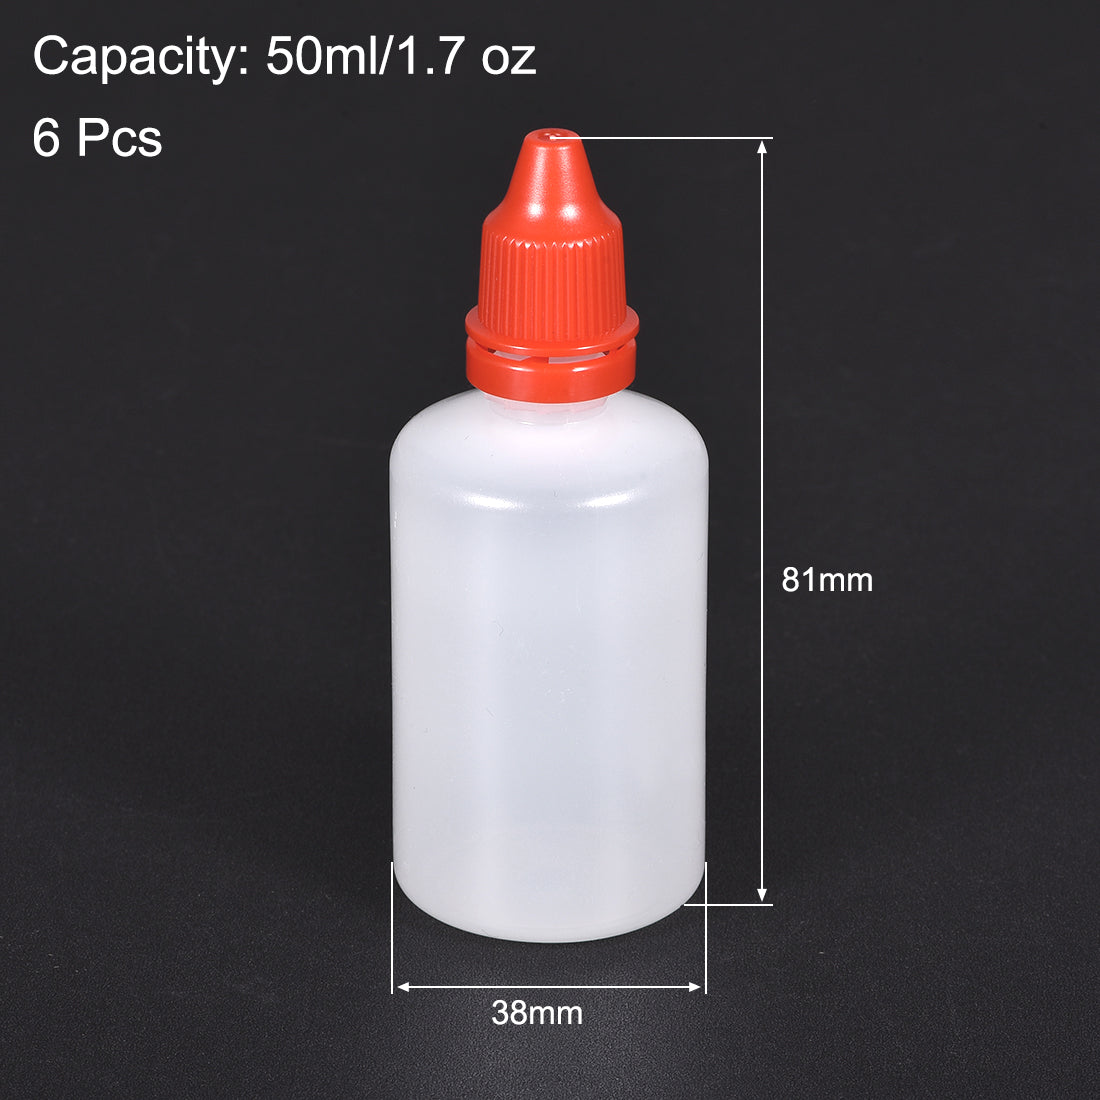 uxcell Uxcell 50ml/1.7 oz Empty Squeezable Dropper Bottle White/Red 6pcs